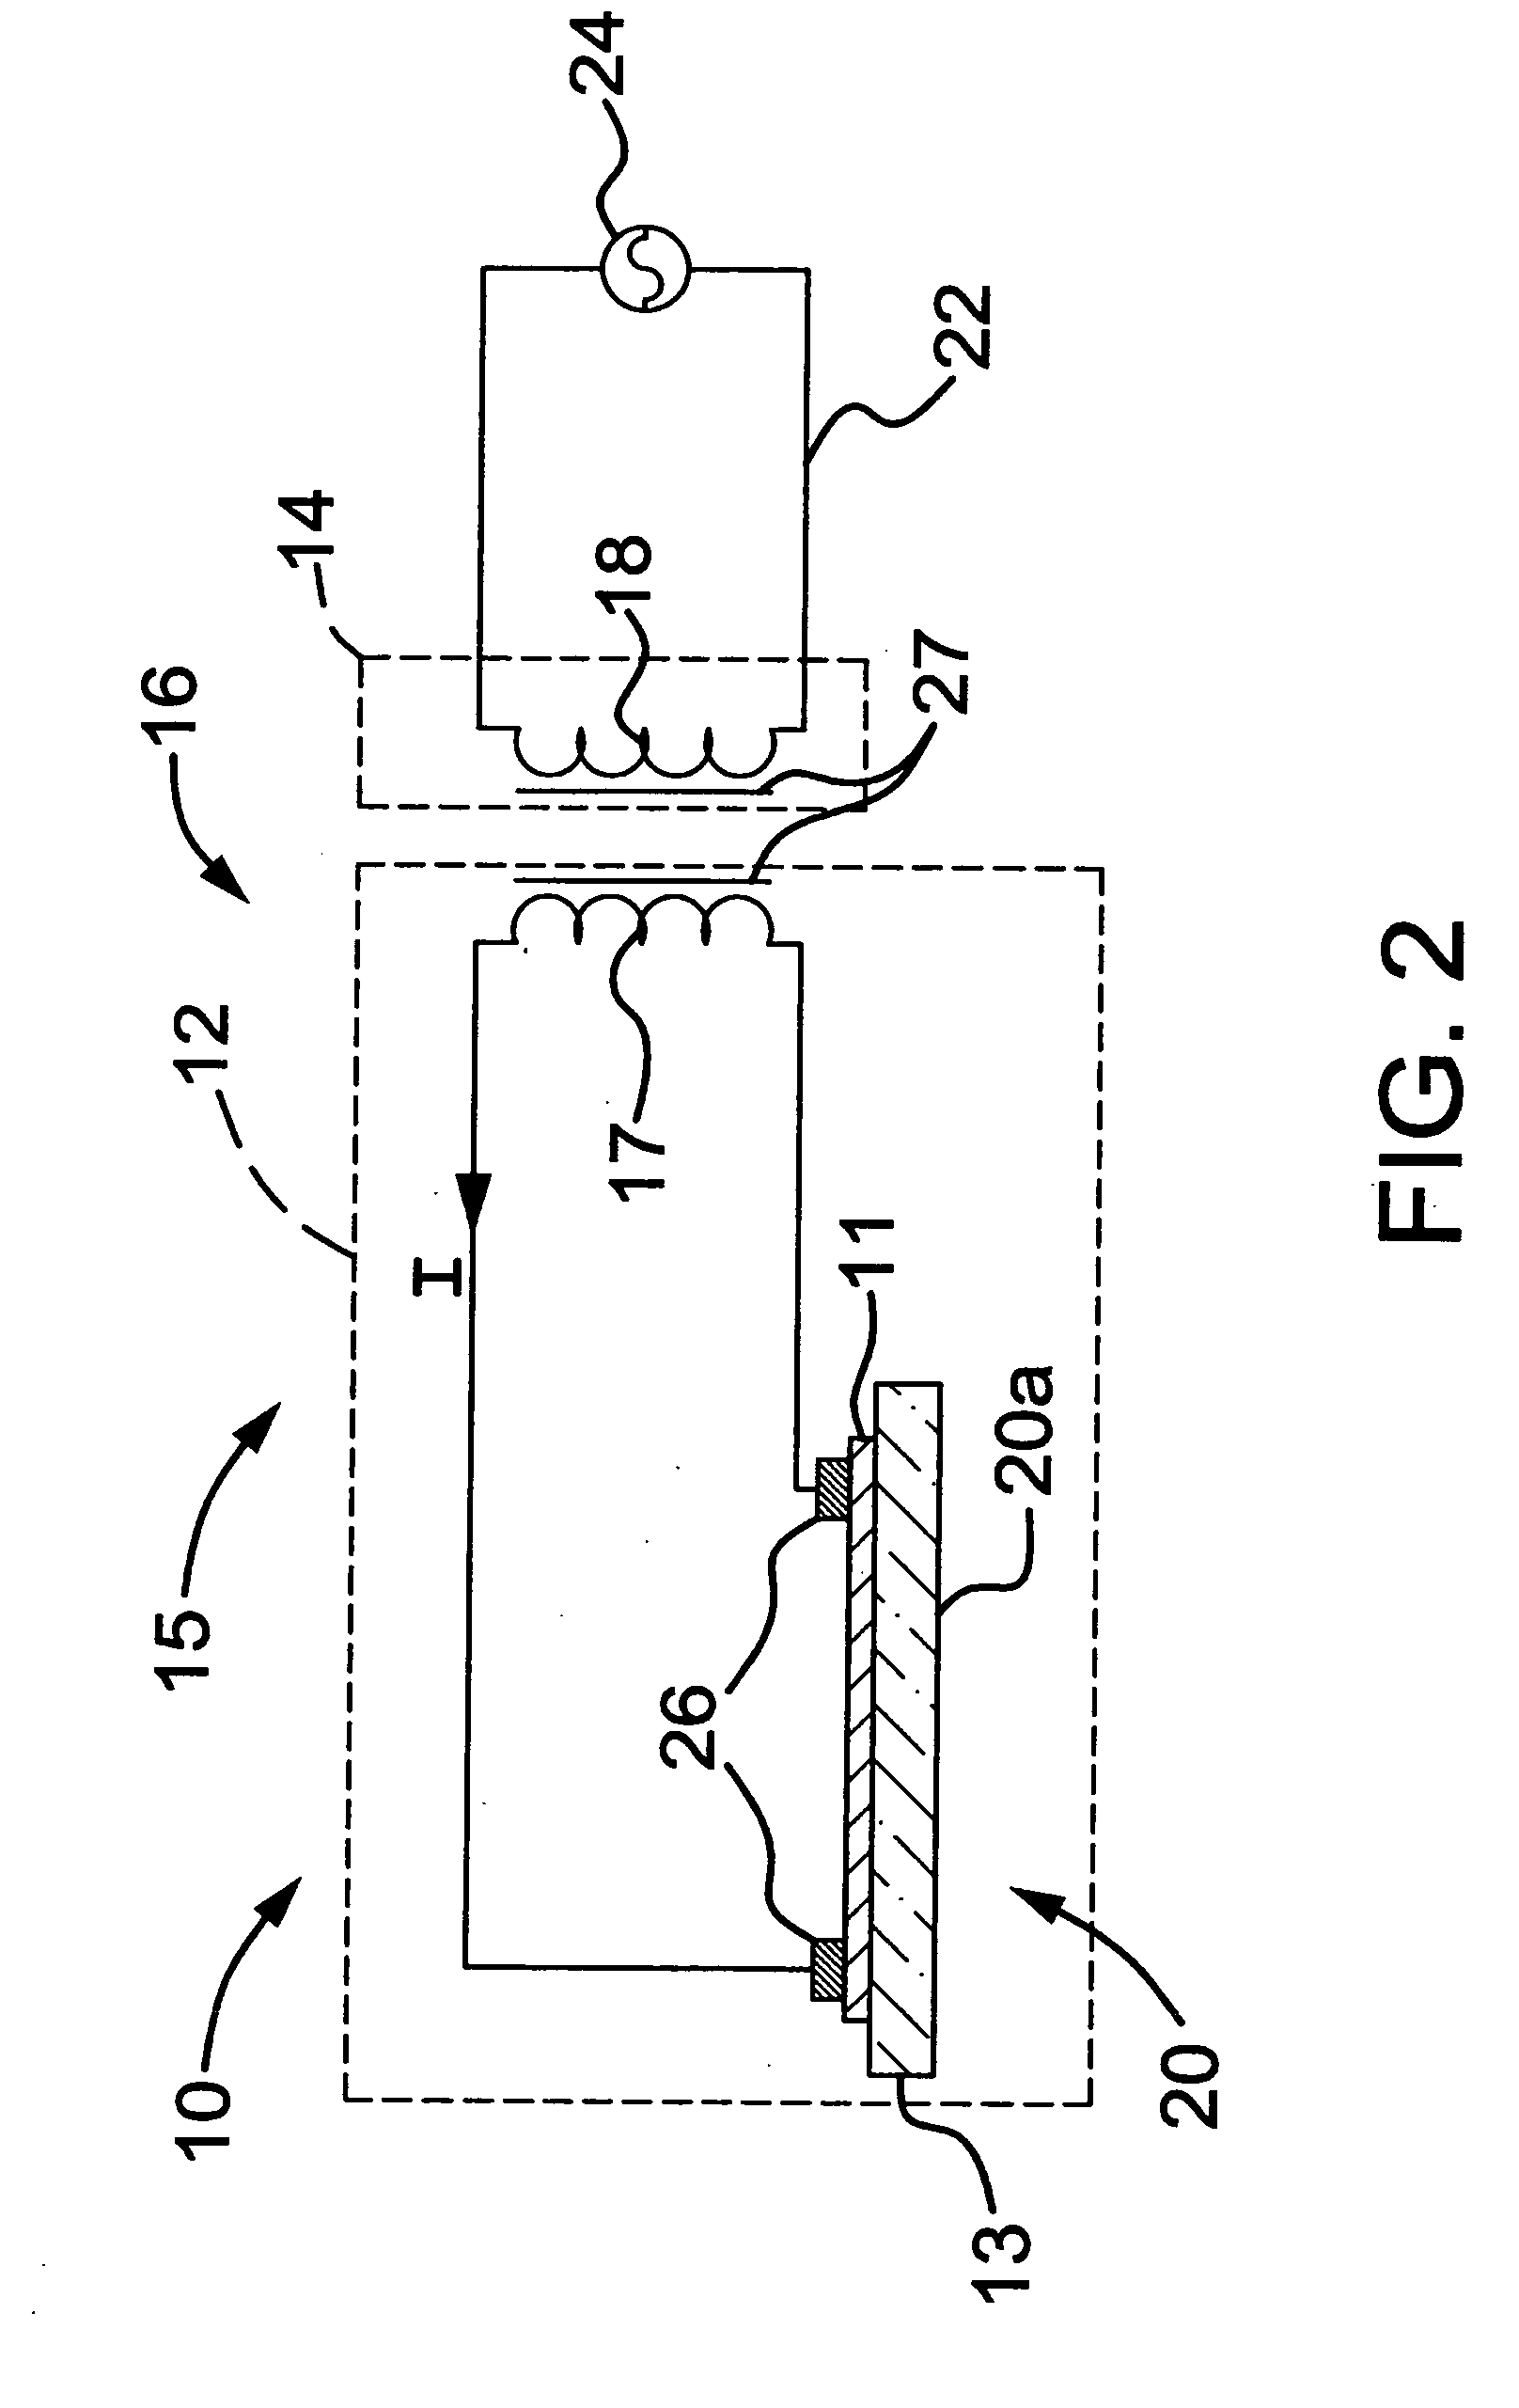 Wireless inductive coupling assembly for a heated glass panel